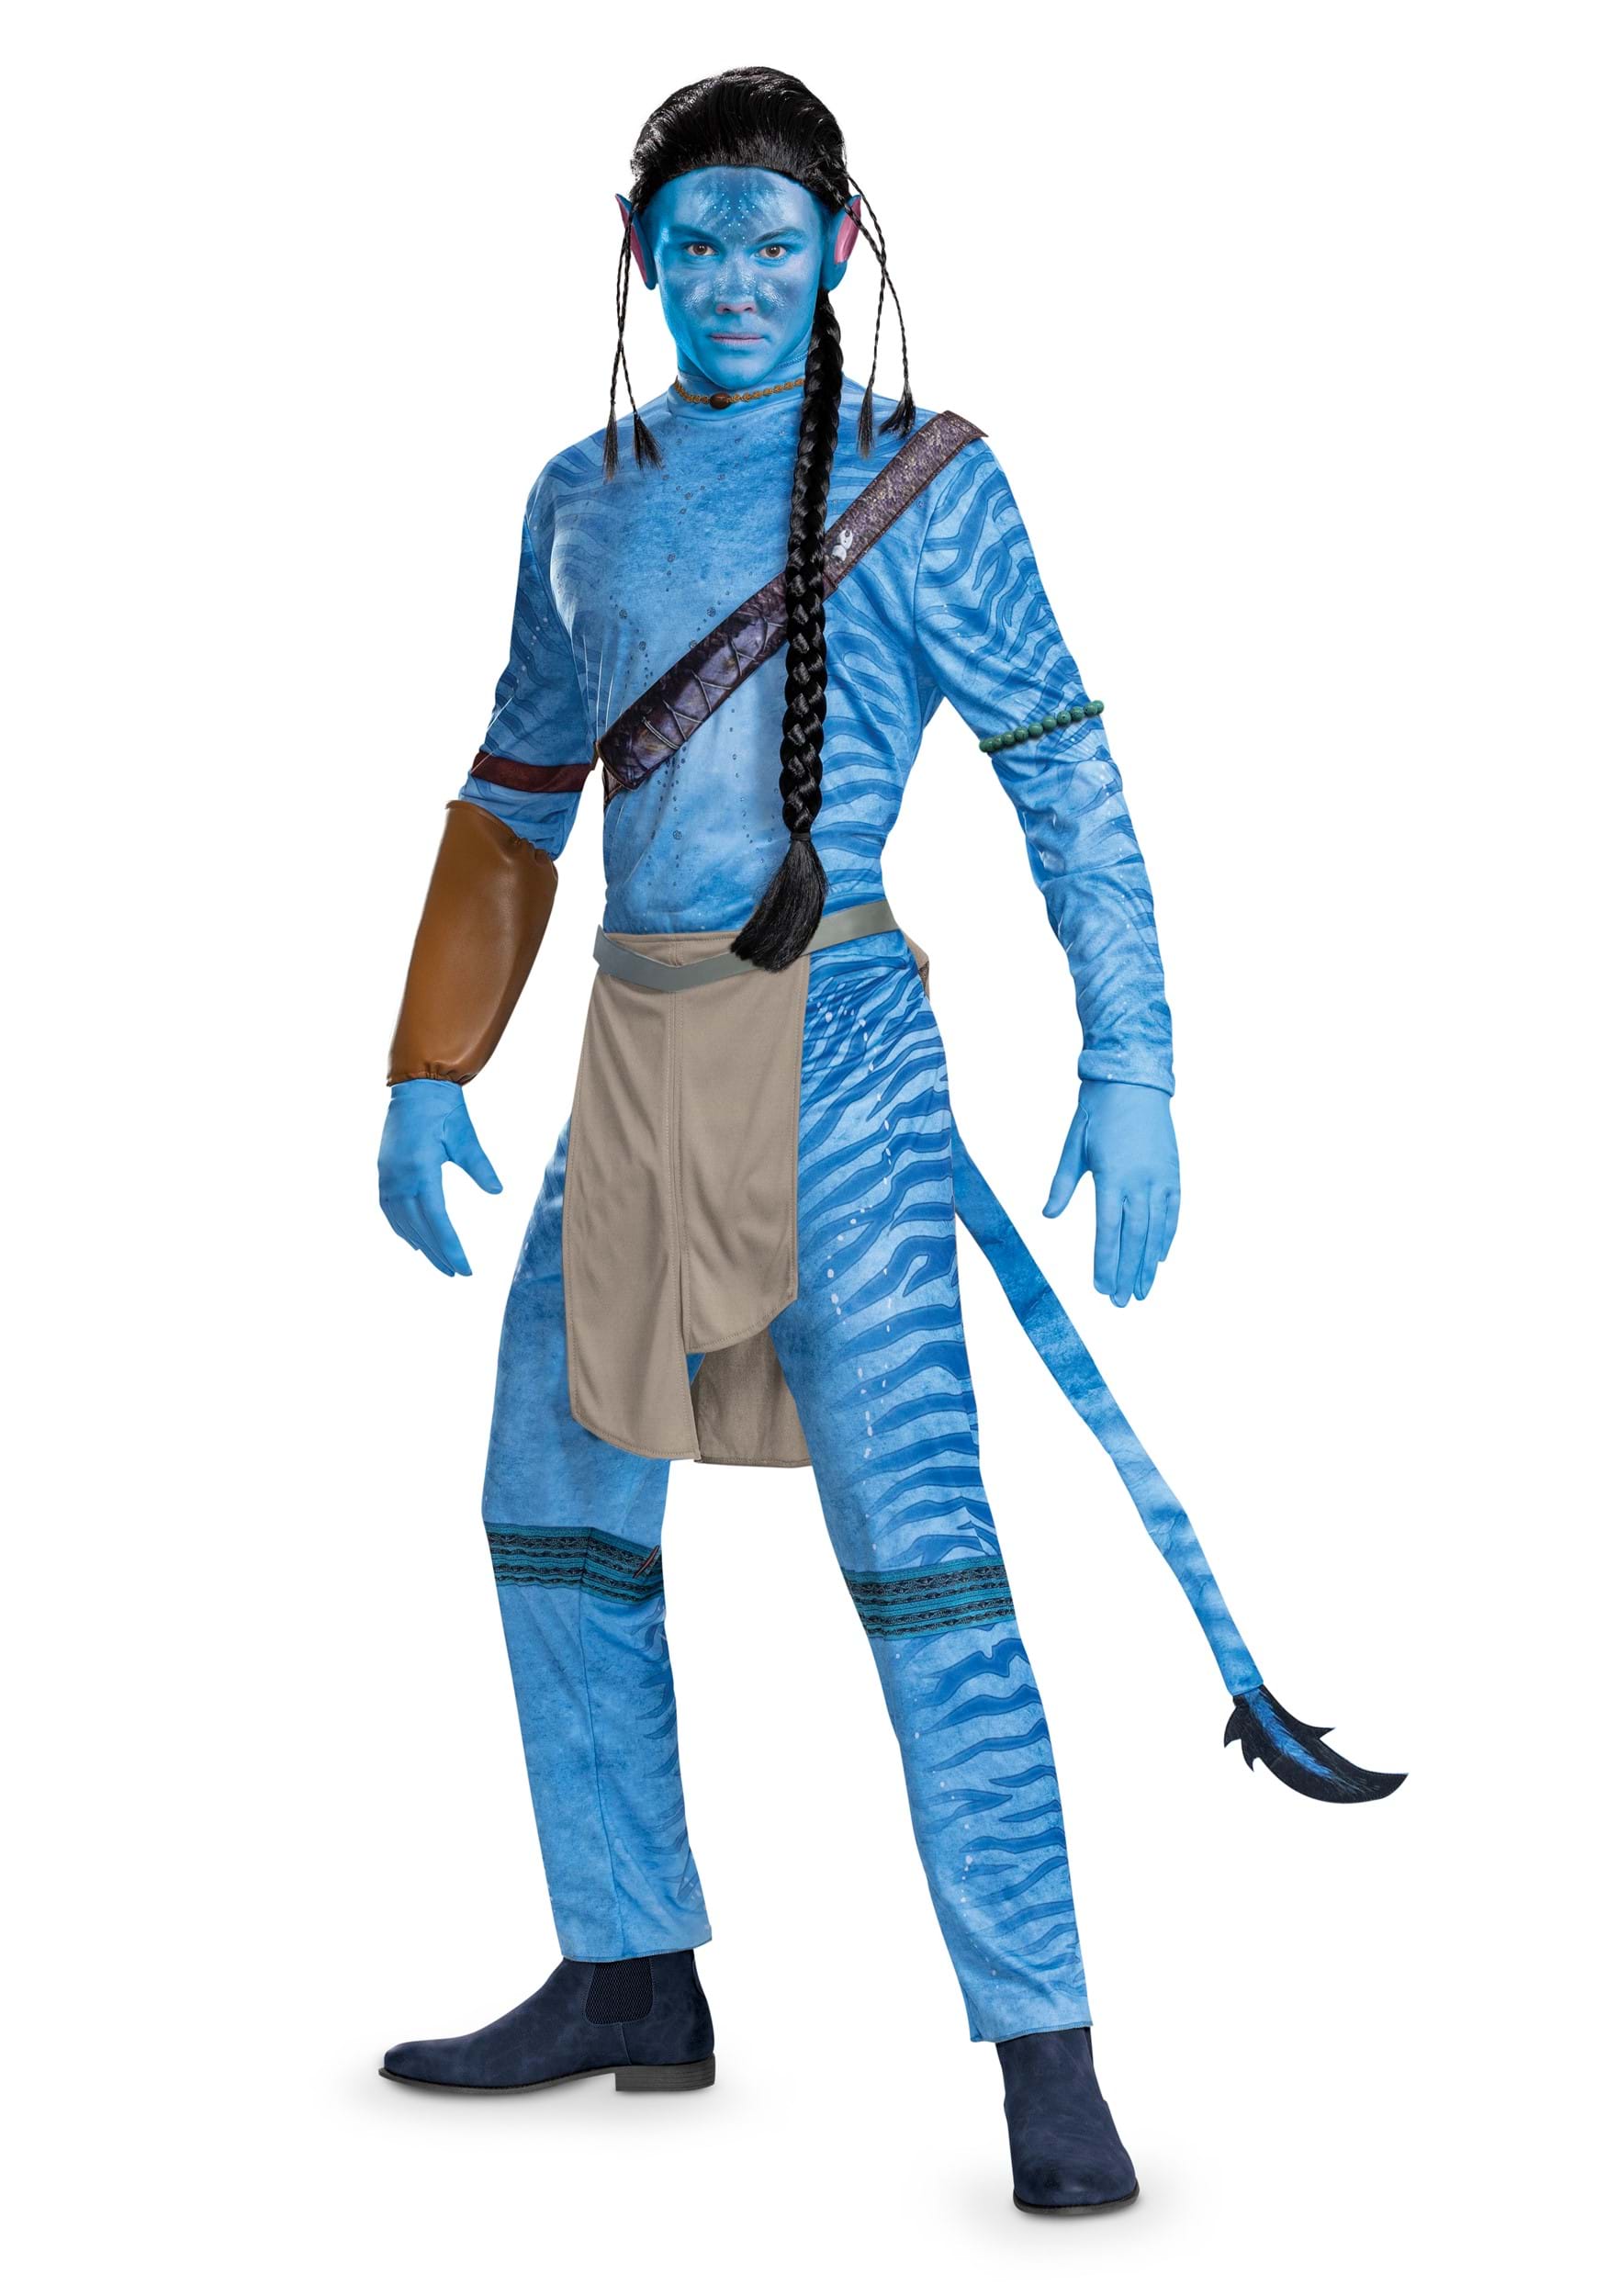 Photos - Fancy Dress Avatar Disguise  Men's Deluxe Jake Costume Brown/Blue DI129249 